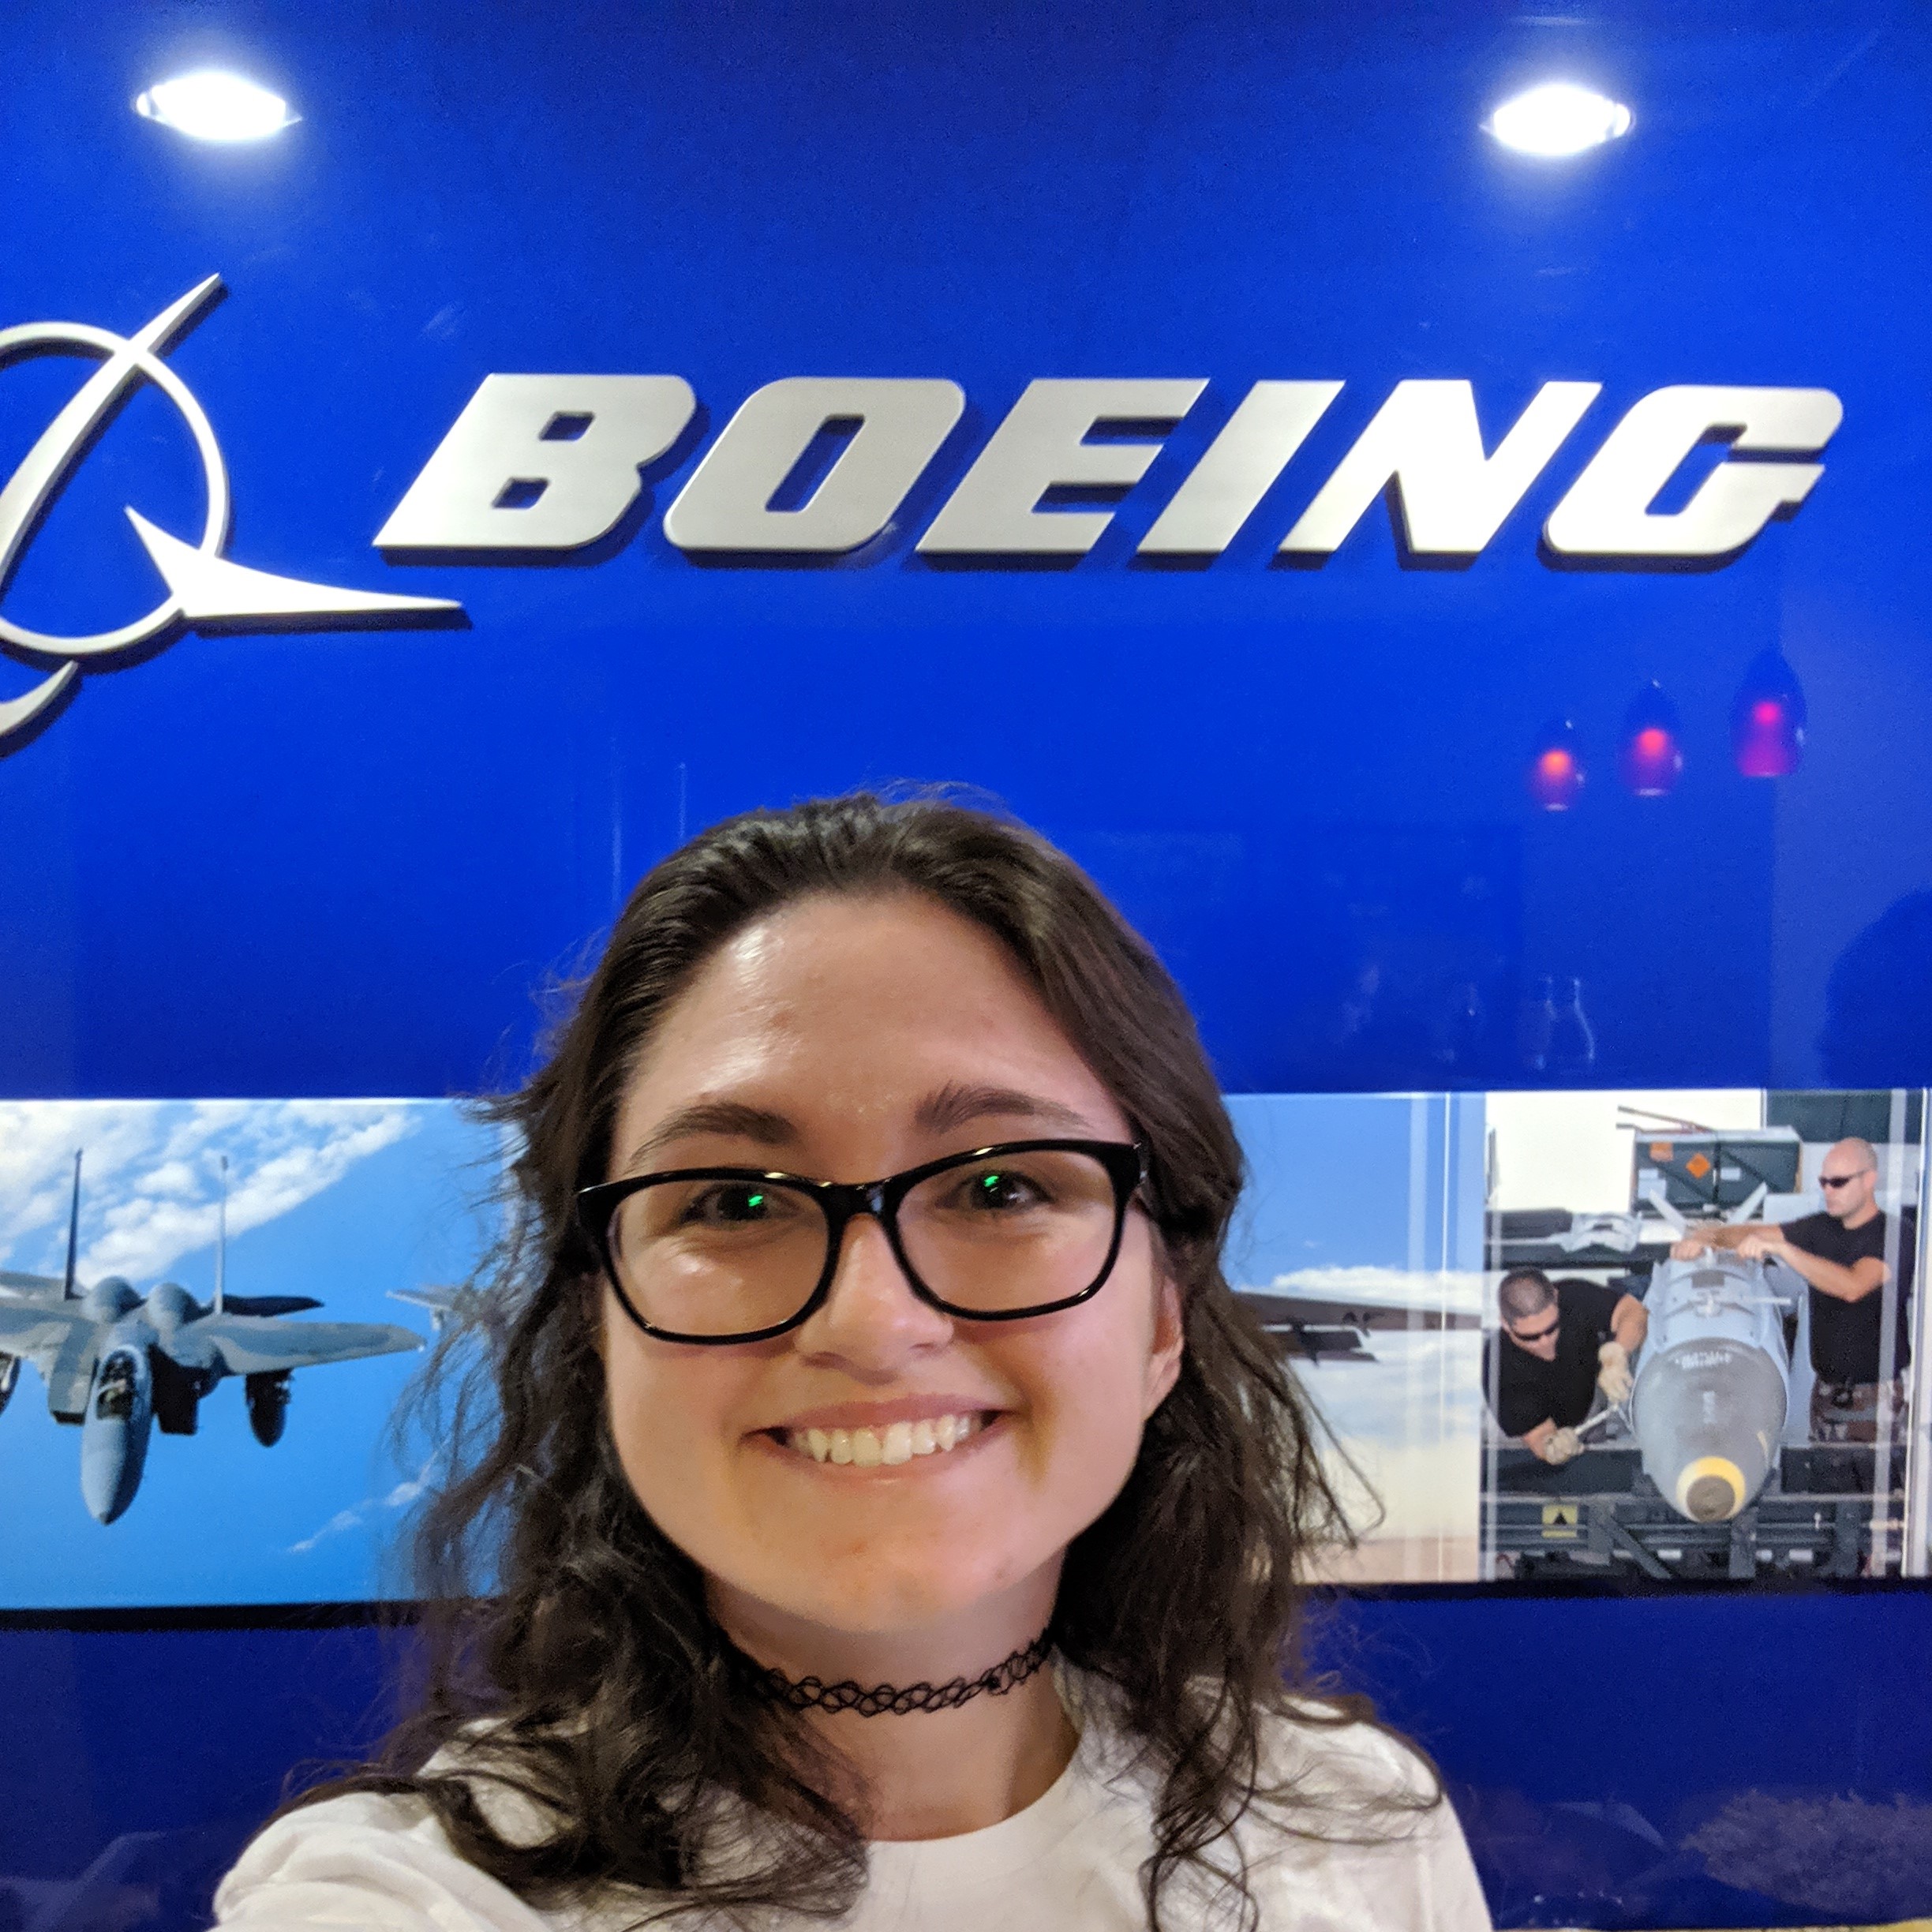 Kaitlyn smiling in front of Boeing blue wall and logo.